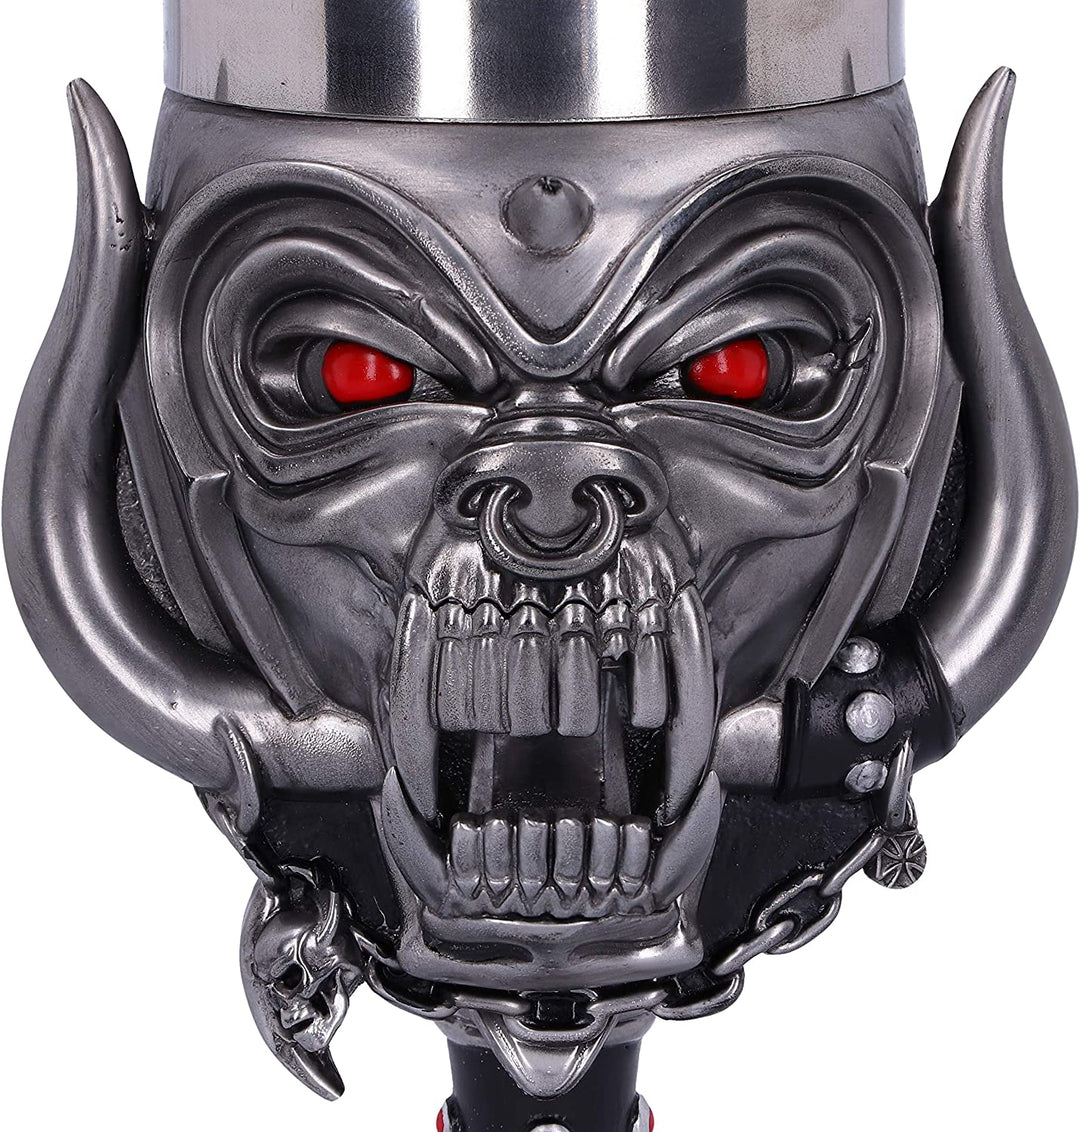 Nemesis Now Officially Licensed Motorhead Snaggletooth Warpig Goblet Glass, Silver, 20.5cm